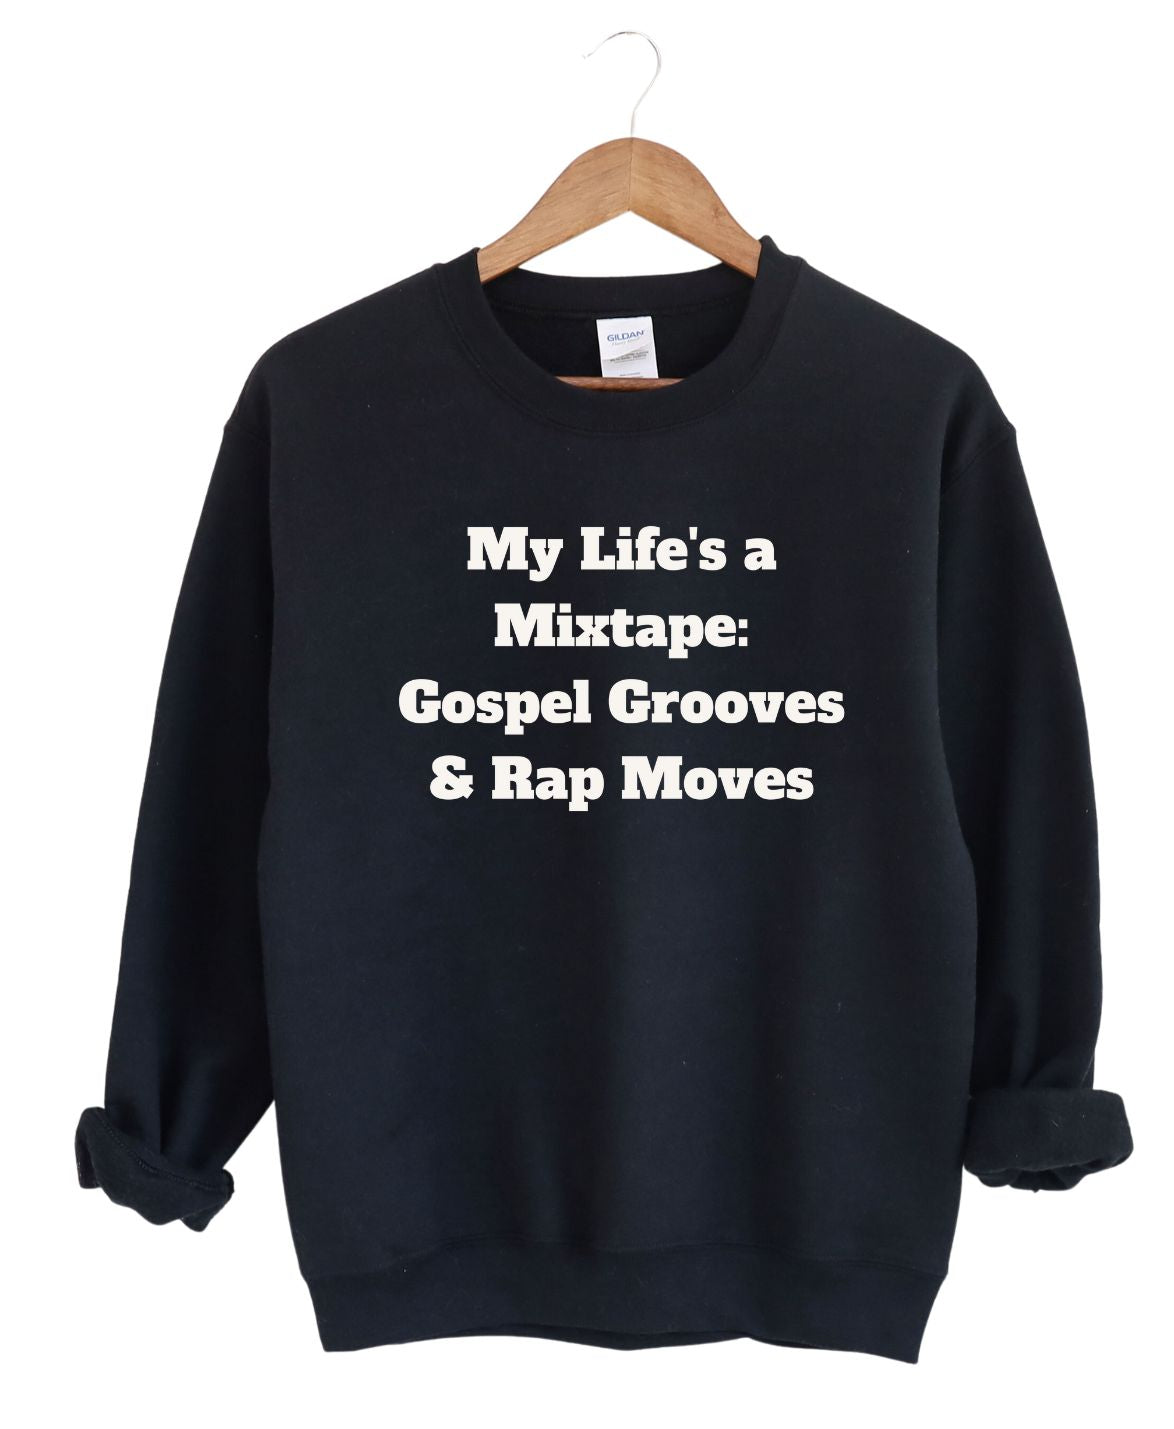 My Life is a Mix Tape Gospel Grooves and Rap Moves  Sweatshirt